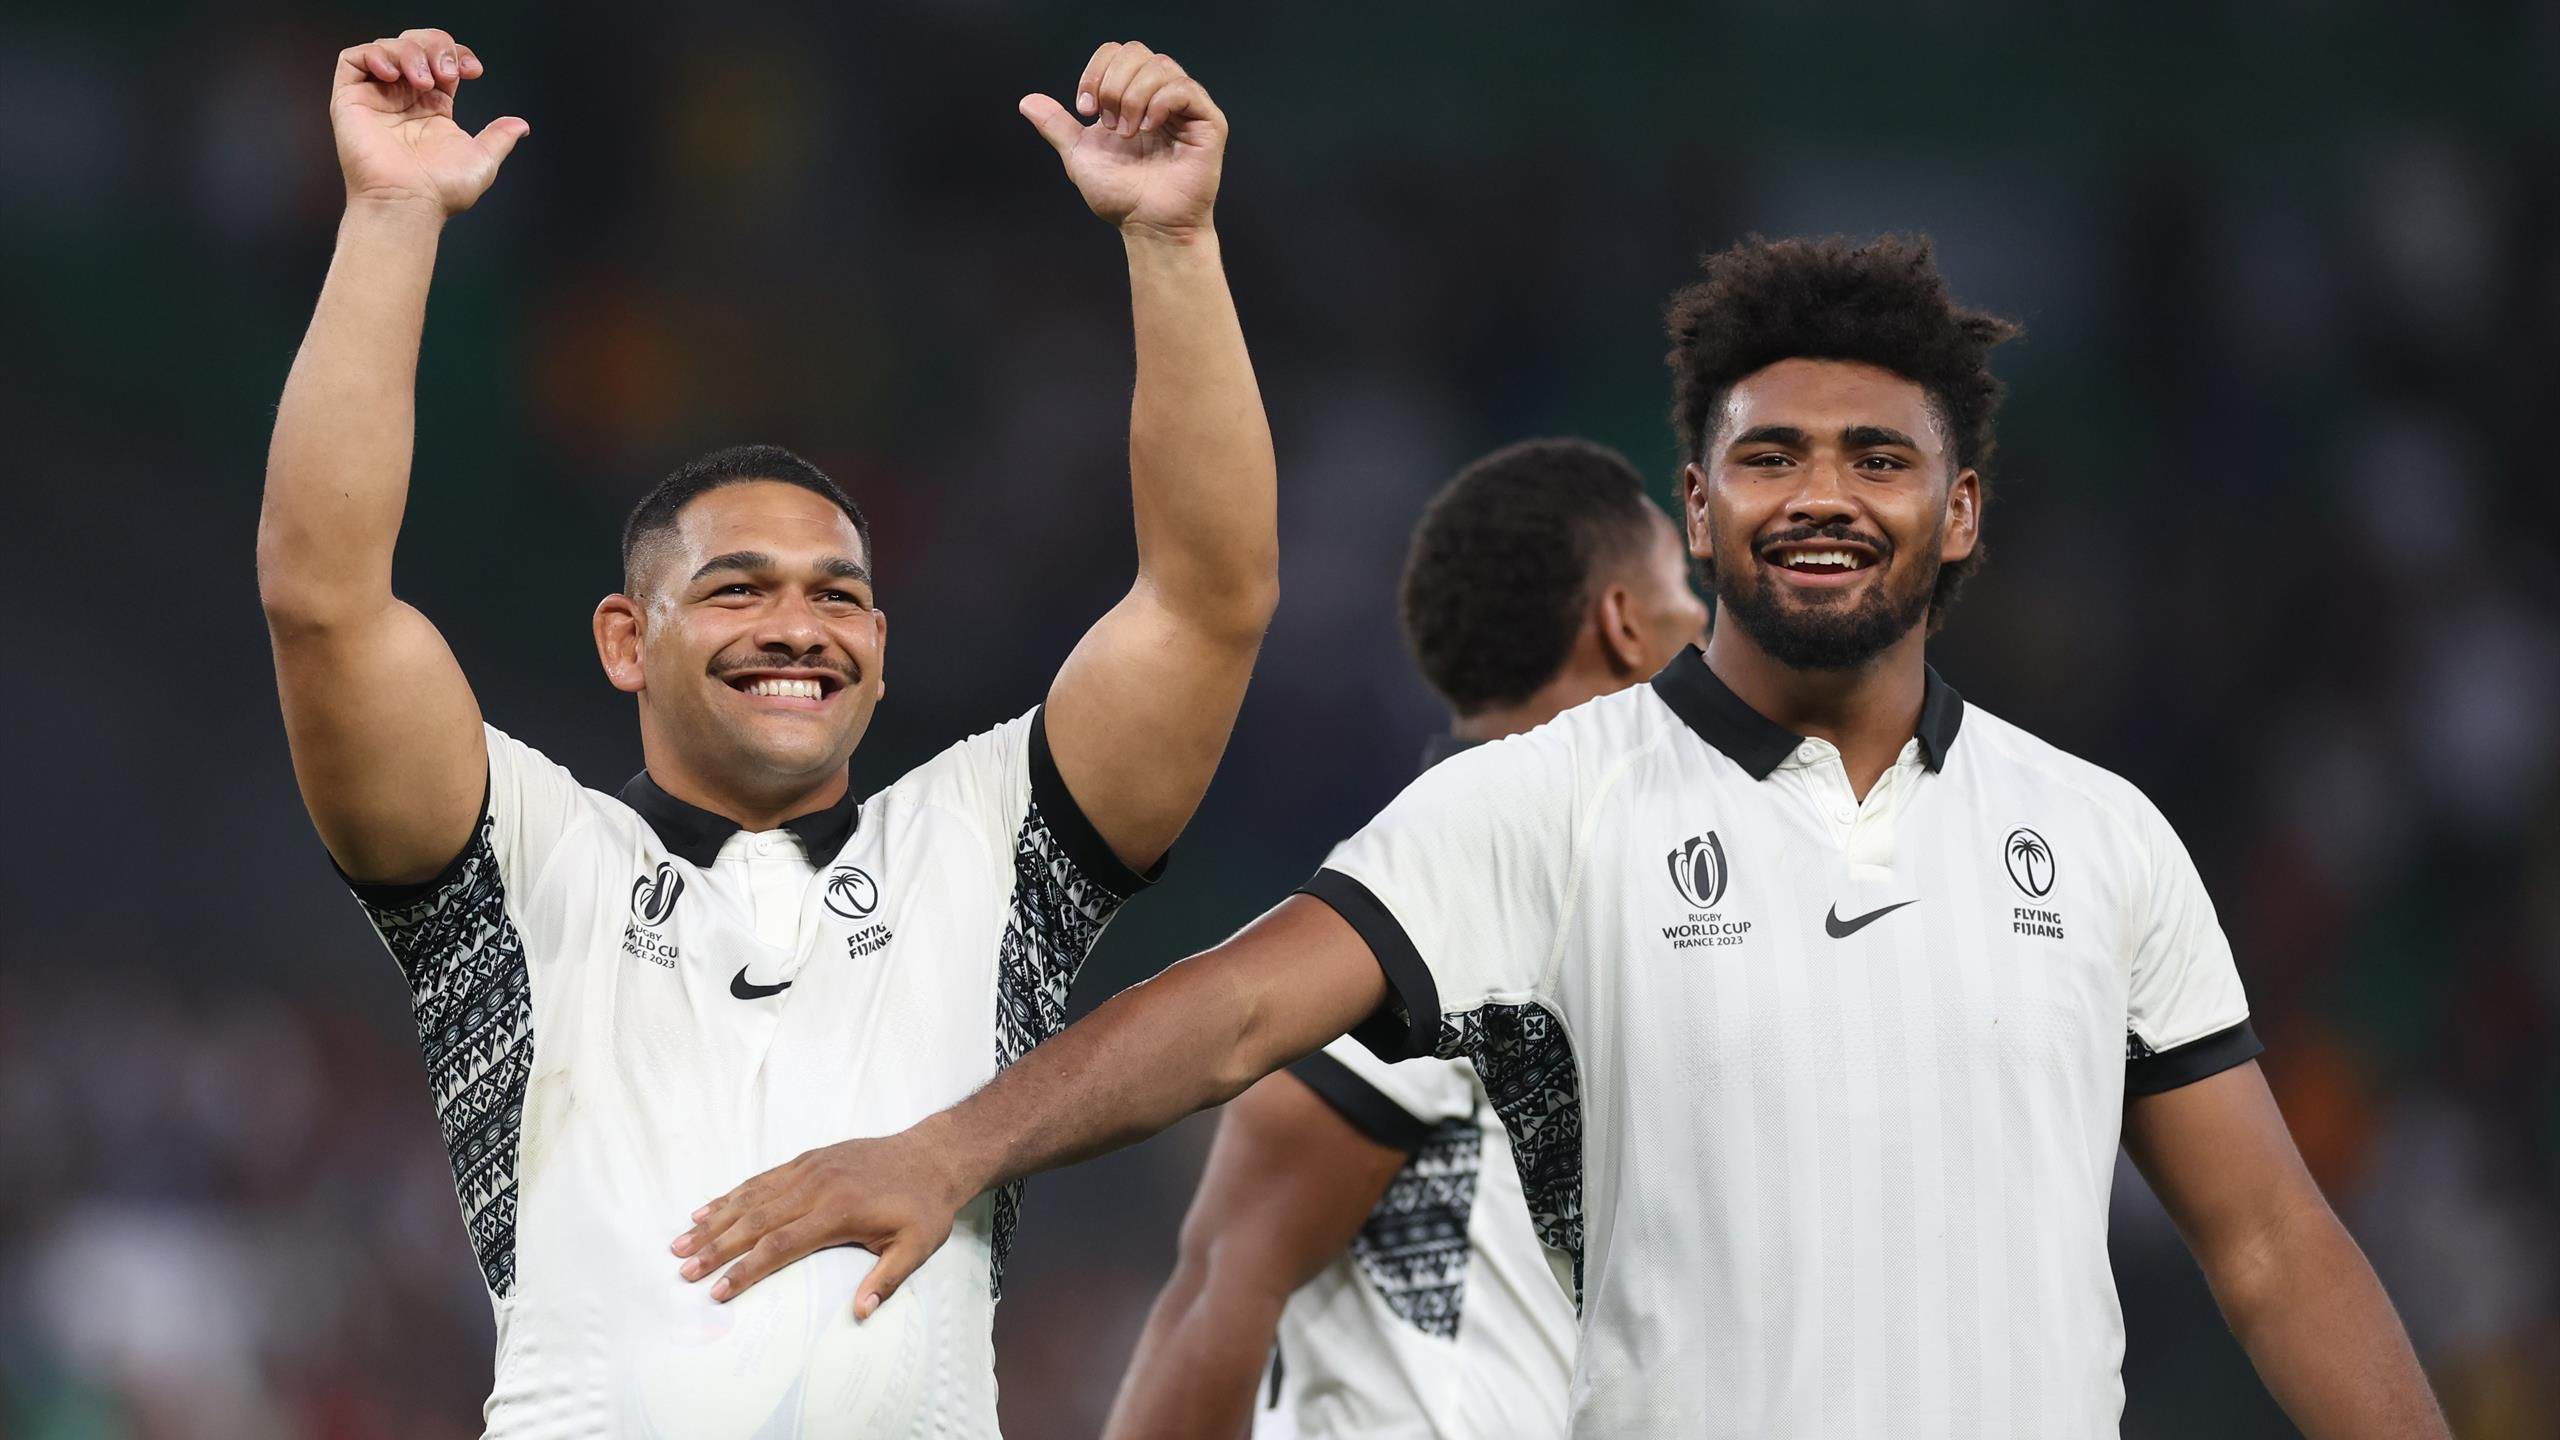 Can Fiji Qualify for the Rugby World Cup Quarterfinals?